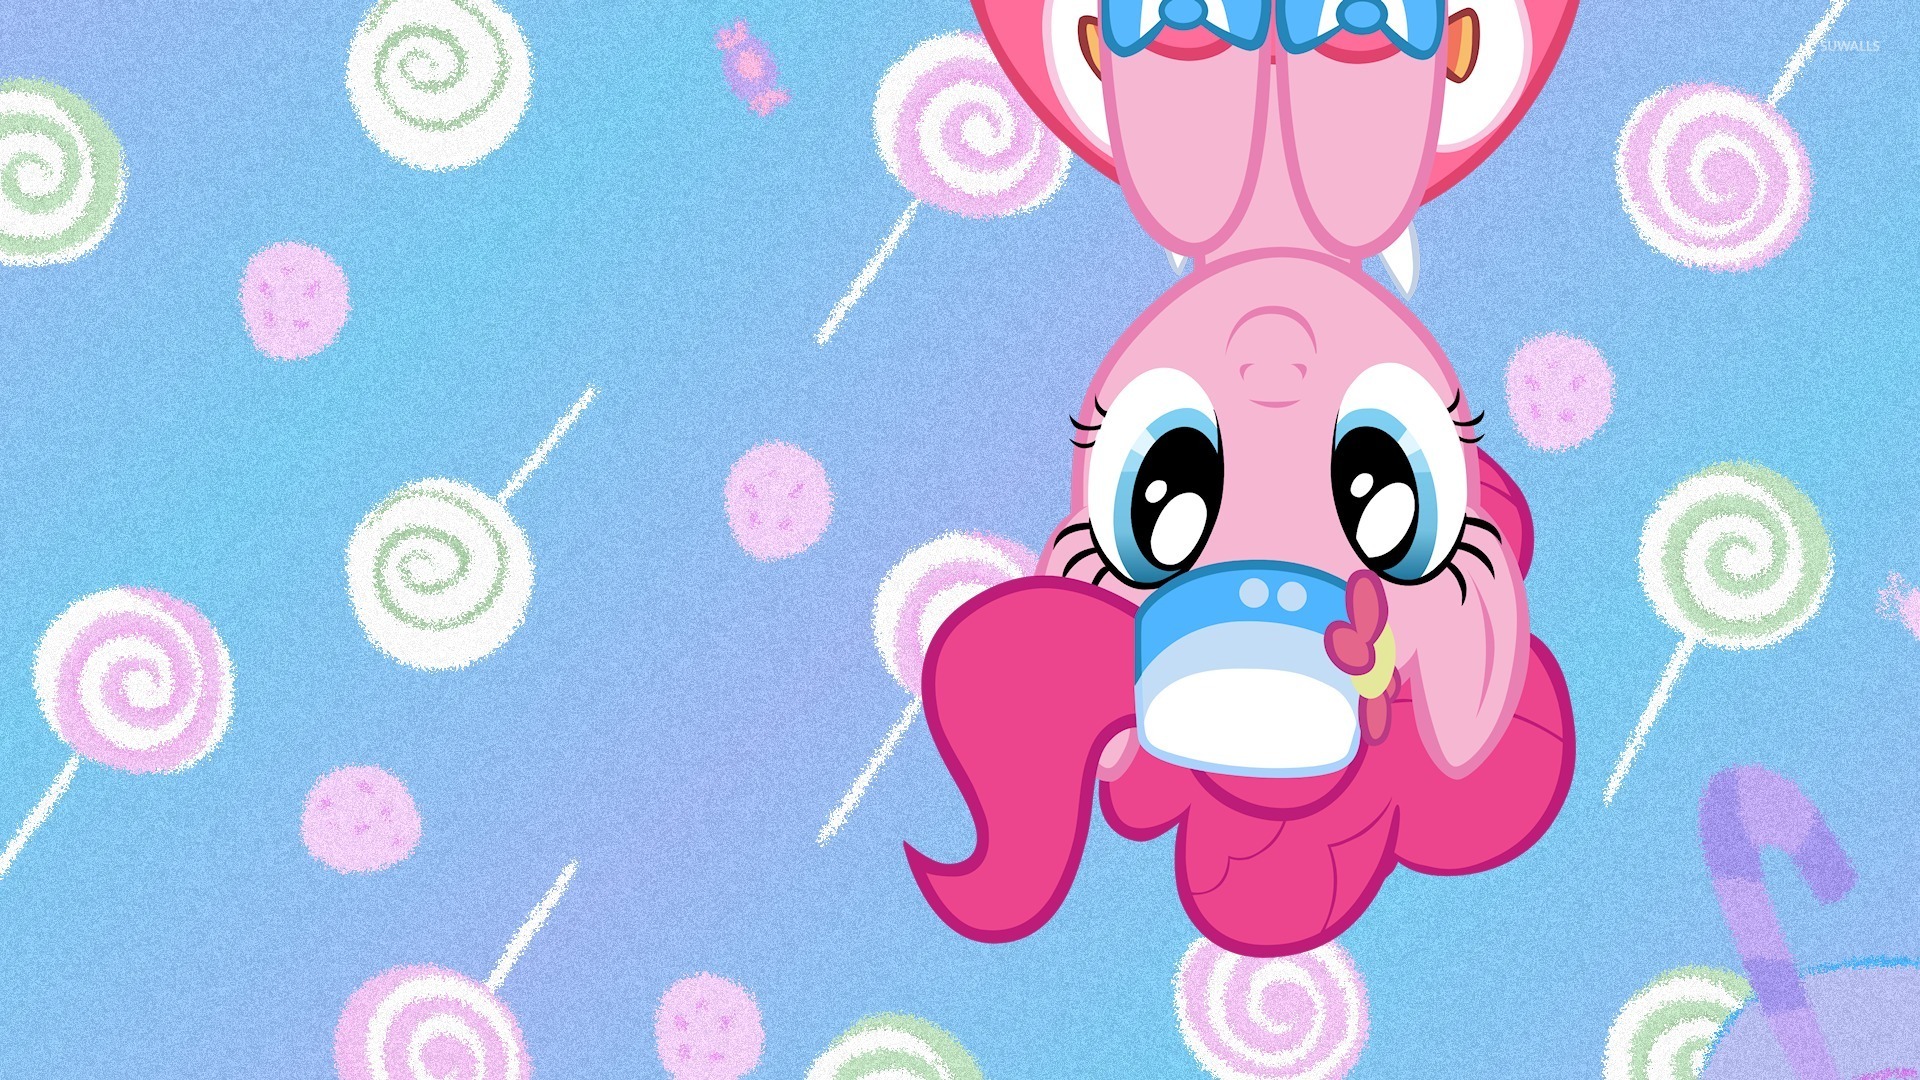 Free download Upside down Pinkie Pie from My Little Pony wallpaper Cartoon [1920x1080] for your Desktop, Mobile & Tablet. Explore Pinkie Pie Wallpaper. Pinkie Pie Wallpaper, Tweety Pie Wallpaper